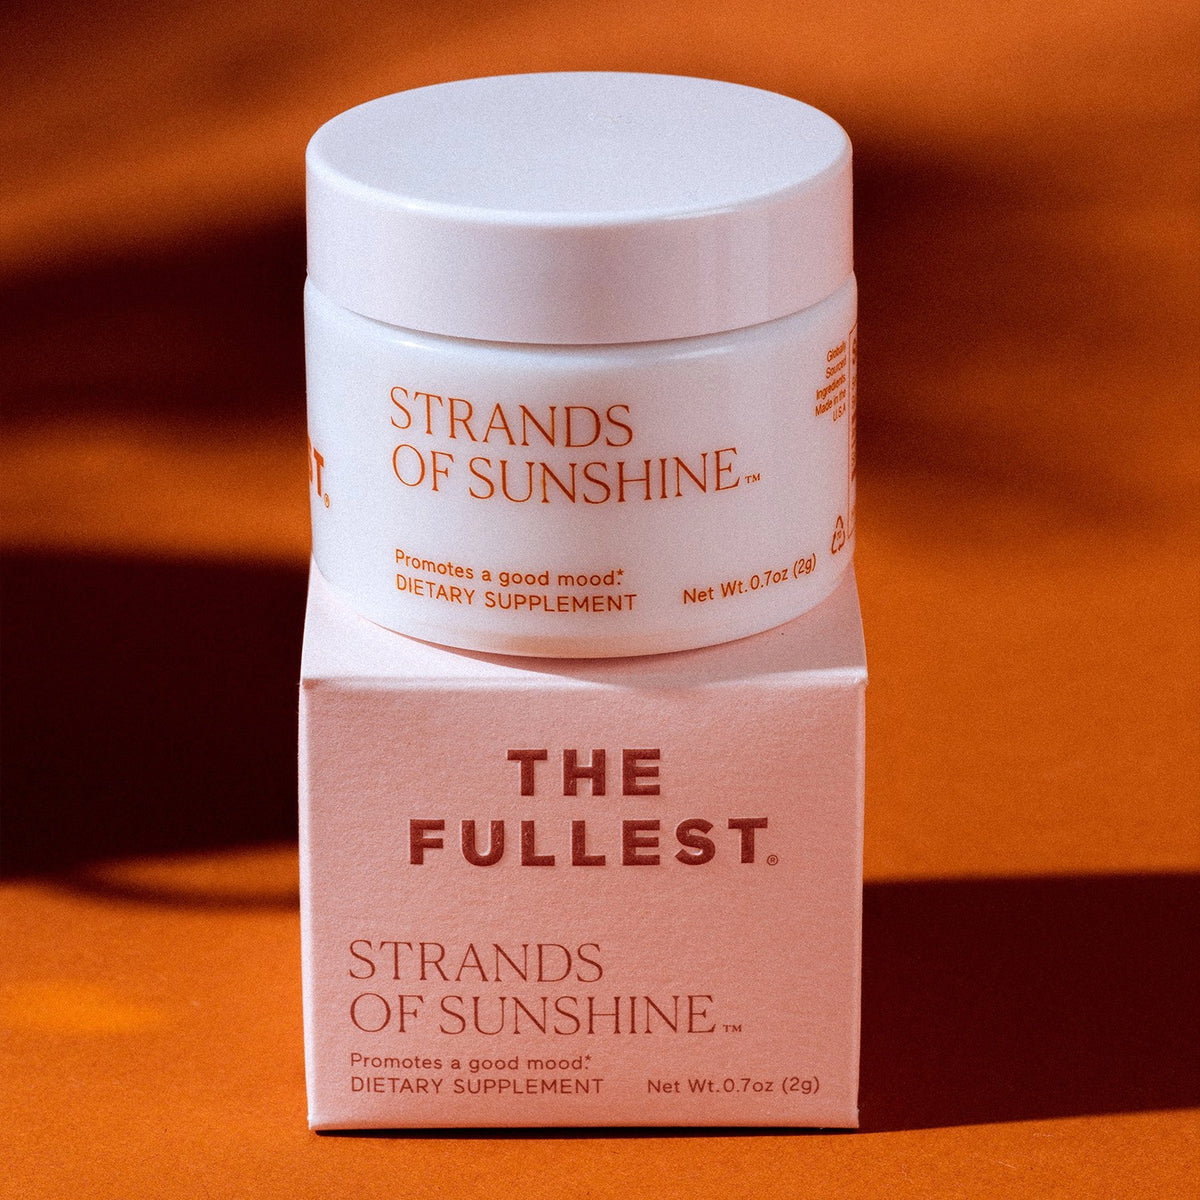 A bottle of &quot;Strands of Sunshine&quot; by THE FULLEST containing pure saffron flower threads, resting on top of its packaging box against an orange backdrop.